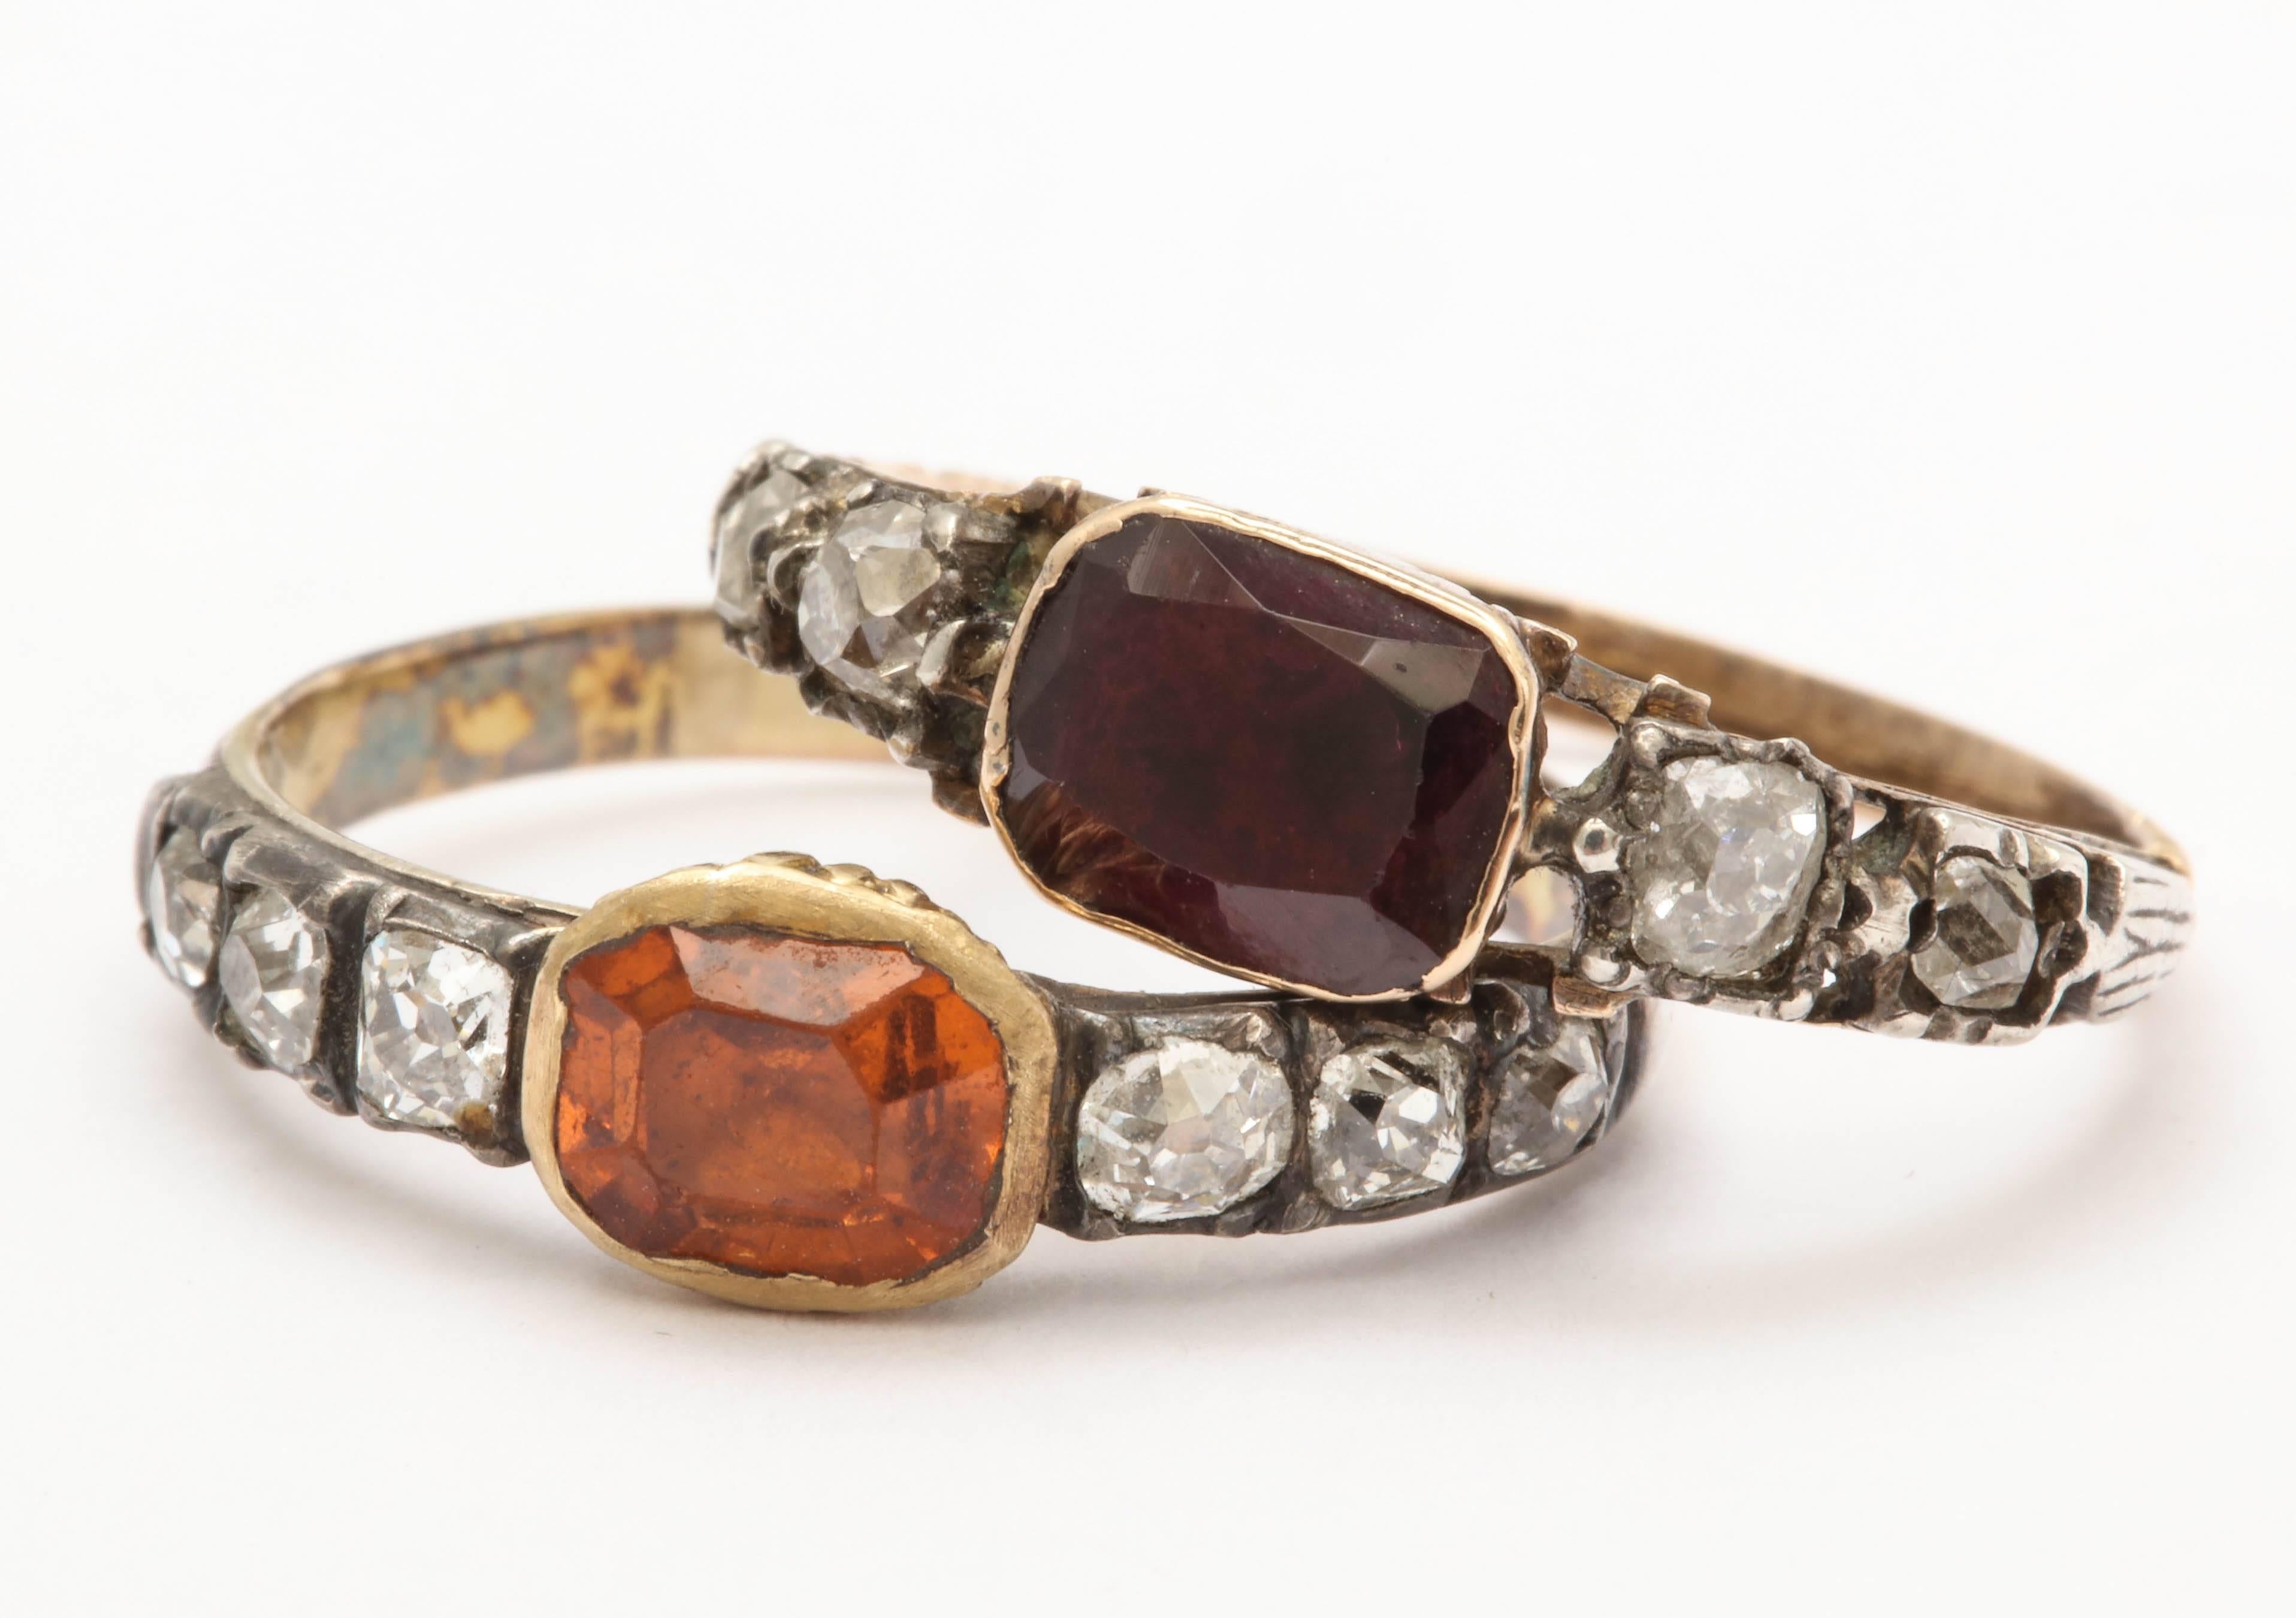 A beautiful duo of nearly matched Georgian era rings. Both closed back and set in silver over yellow gold. One is set with a garnet and flanked by two diamonds on either side. The other is set with a hessonite flanked with three diamonds on either